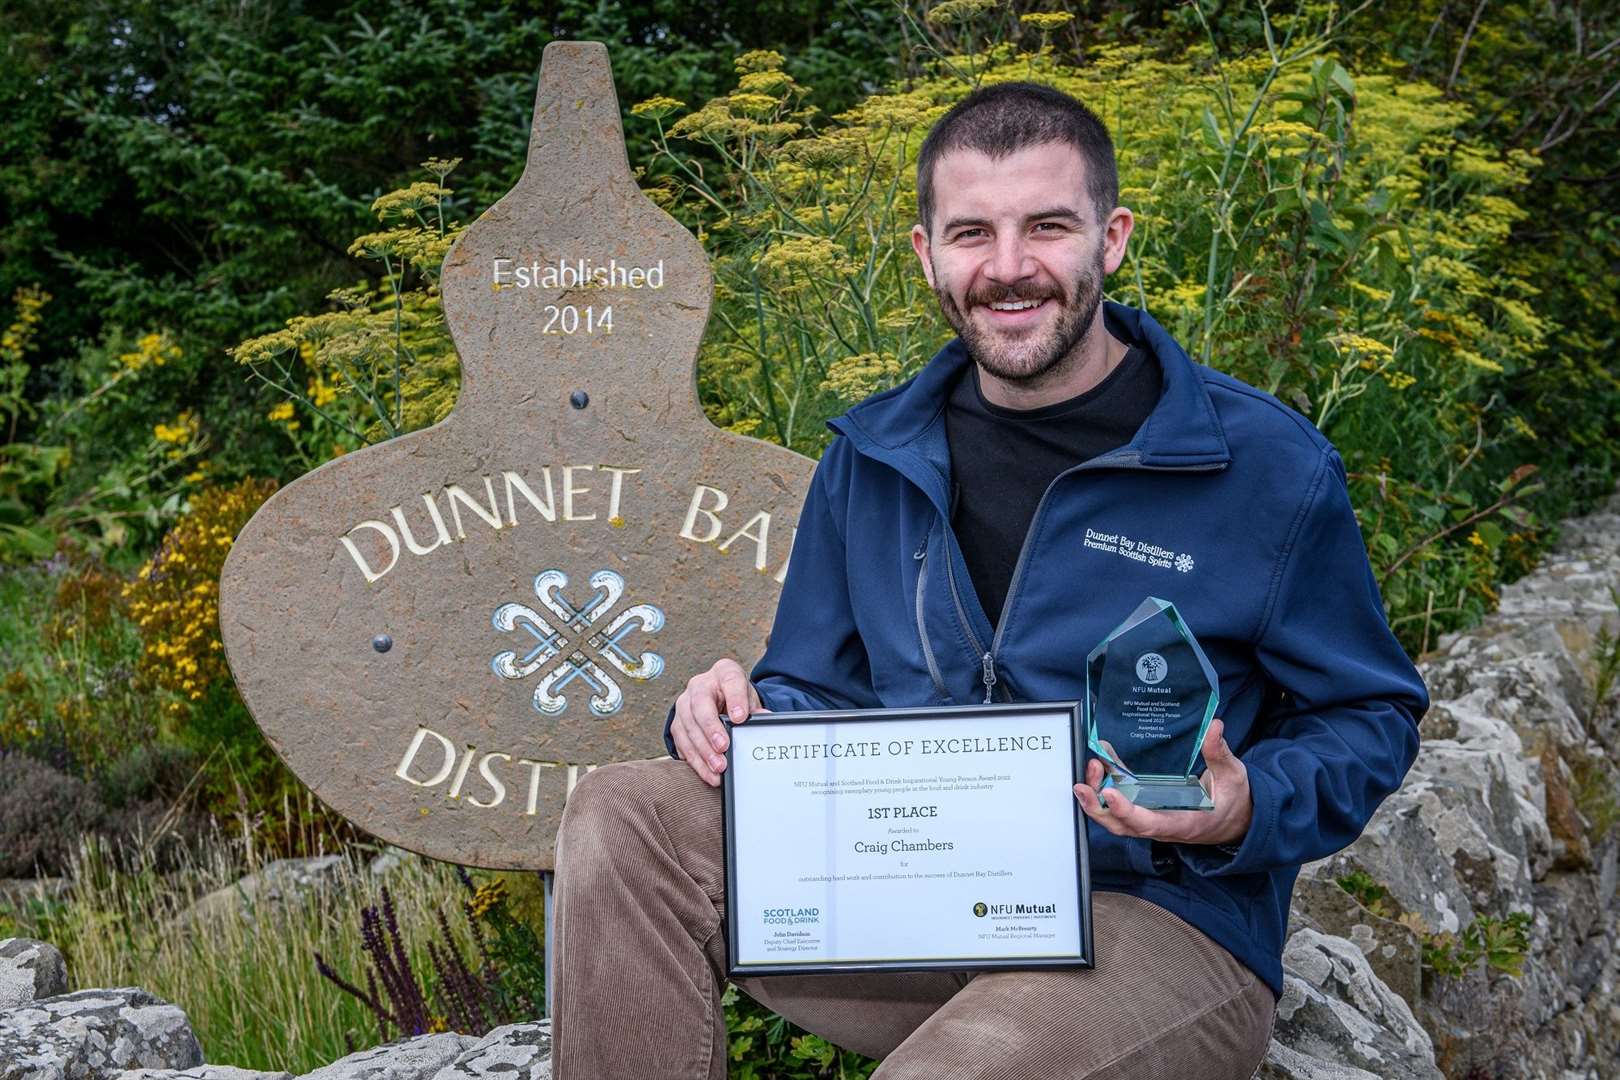 Last year’s winner was 23-year-old Craig Chambers, a Distiller at Dunnet Bay Distillers based in Thurso.